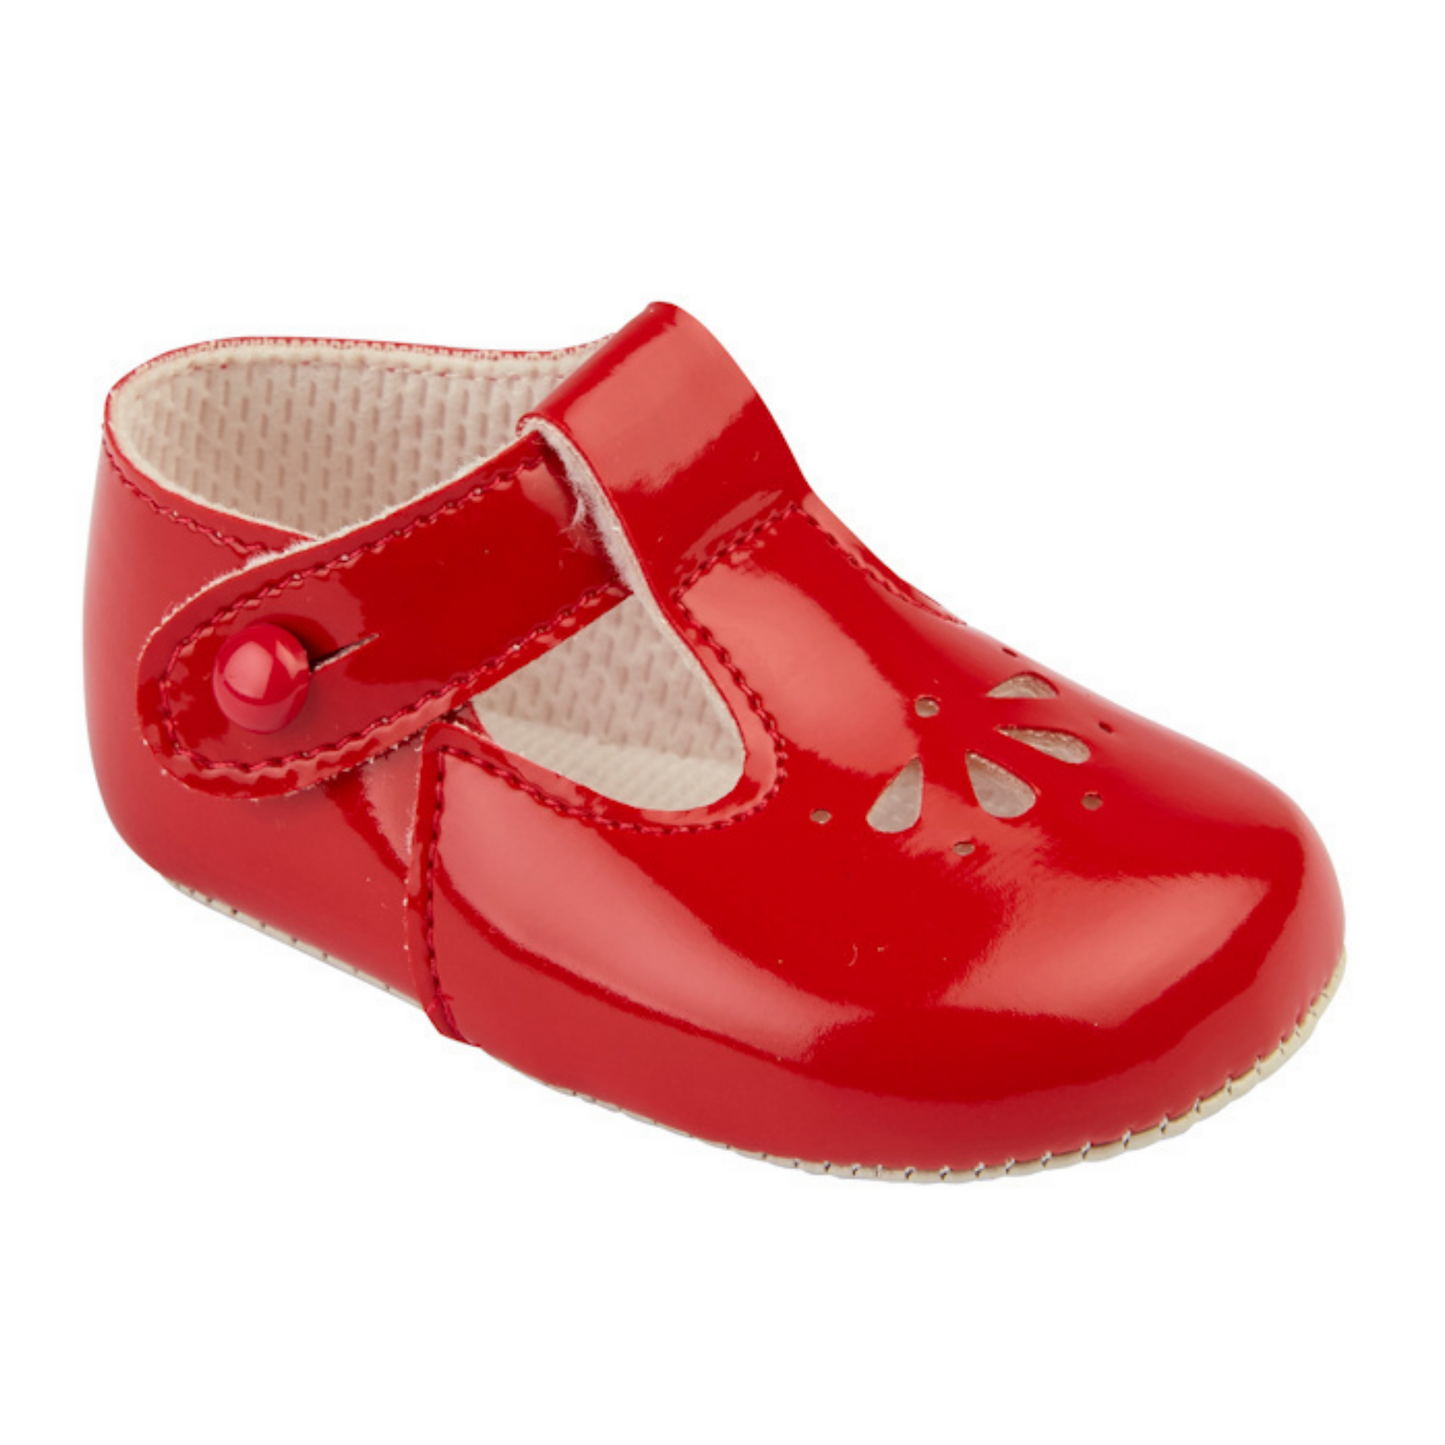 Red Patent Pre Walkers